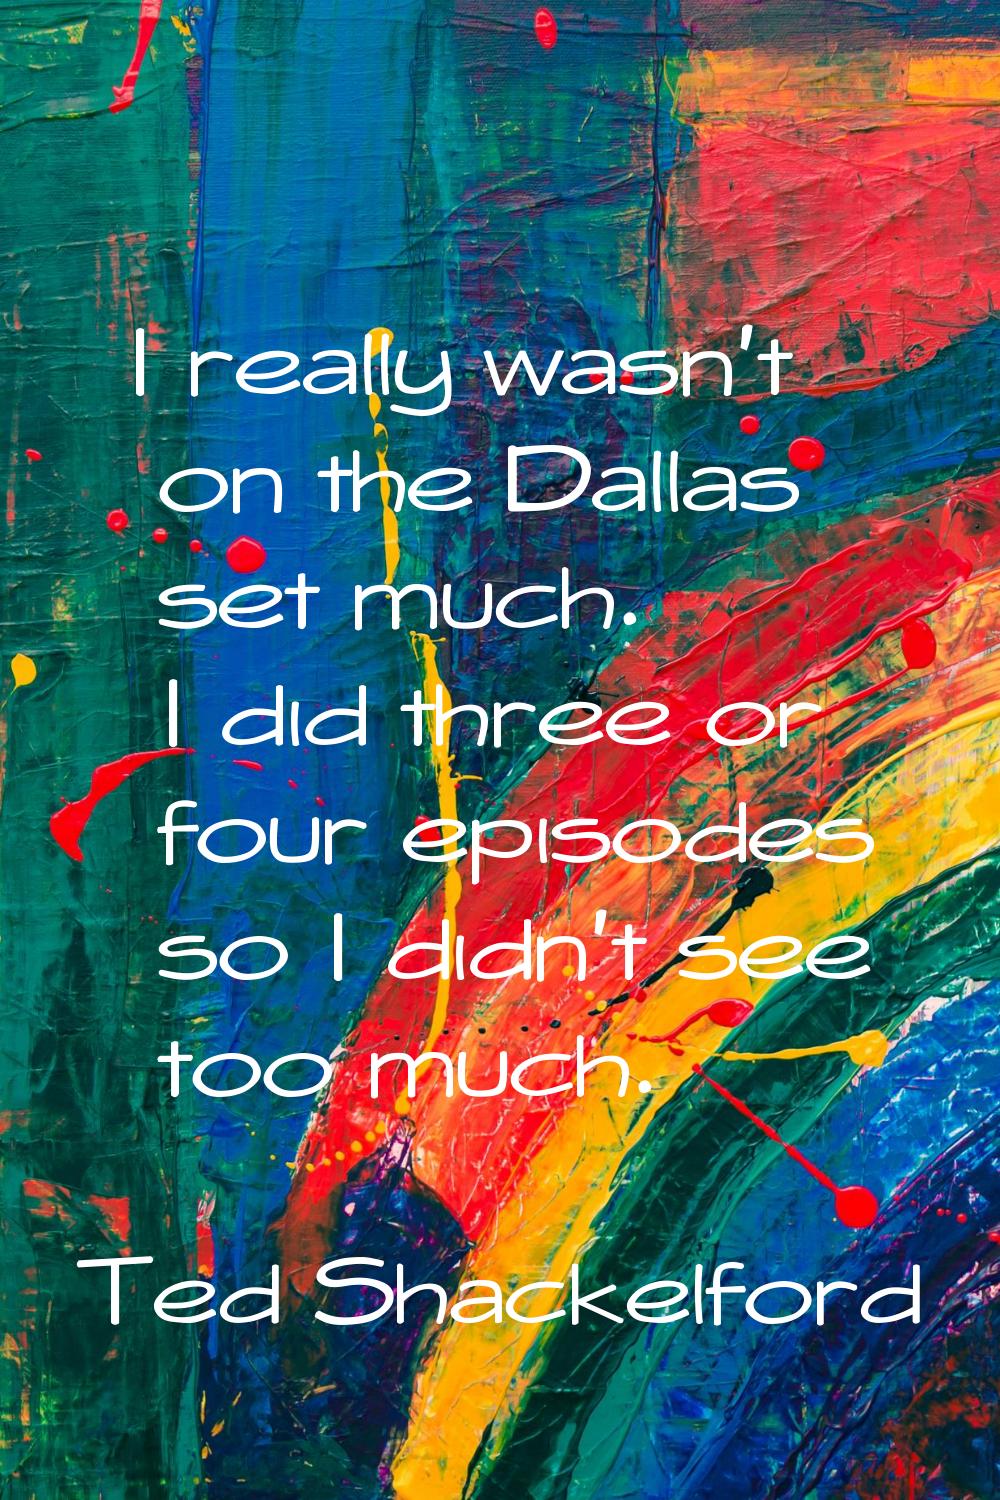 I really wasn't on the Dallas set much. I did three or four episodes so I didn't see too much.